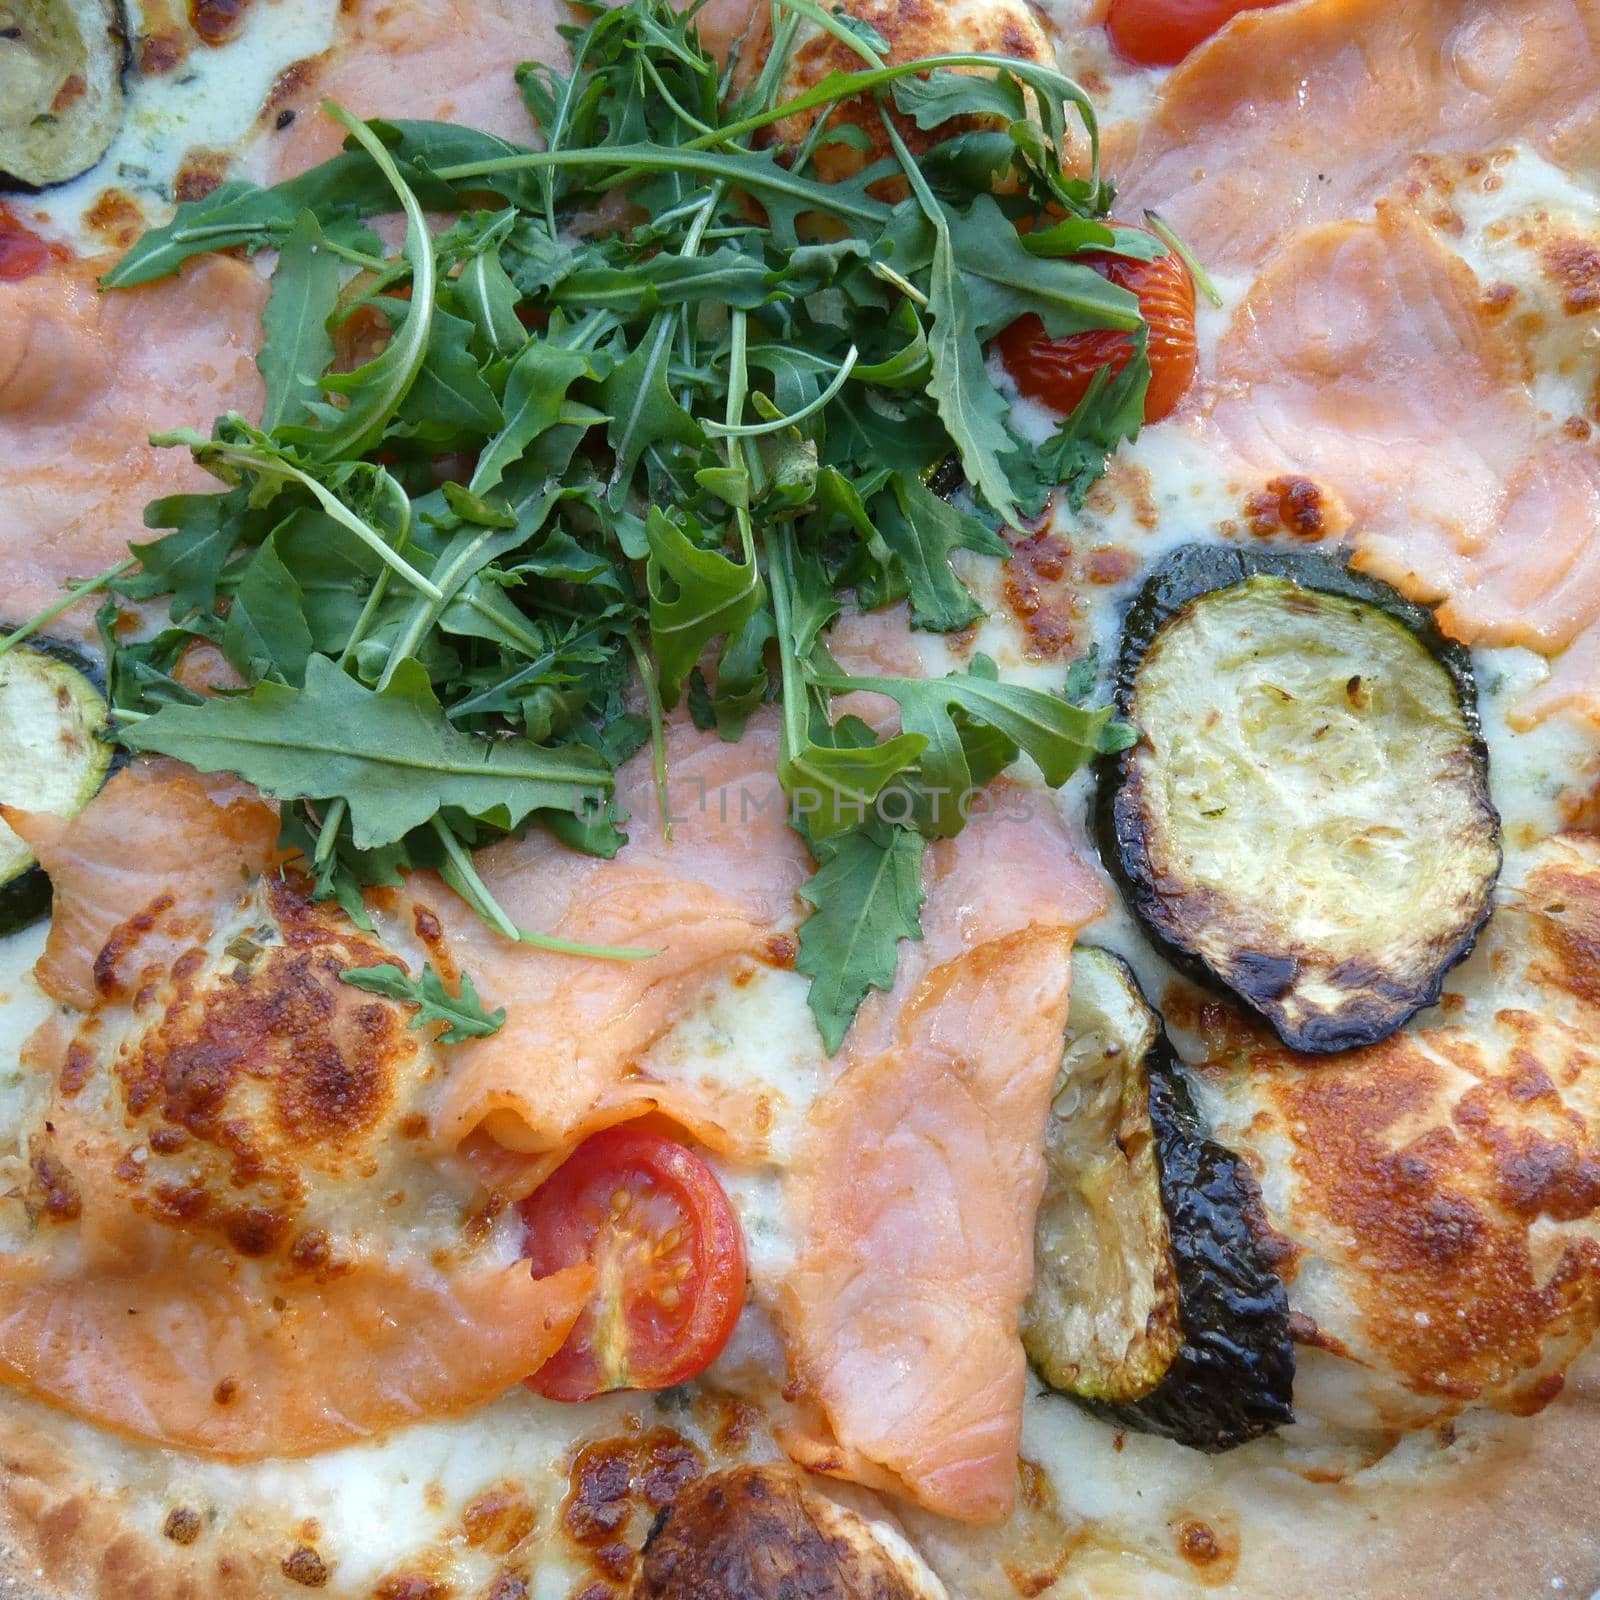 Pizza with fresh ingredients: salmon, tomatoes, aubergines, rucola salad,  cheese. Baked in a stone oven.